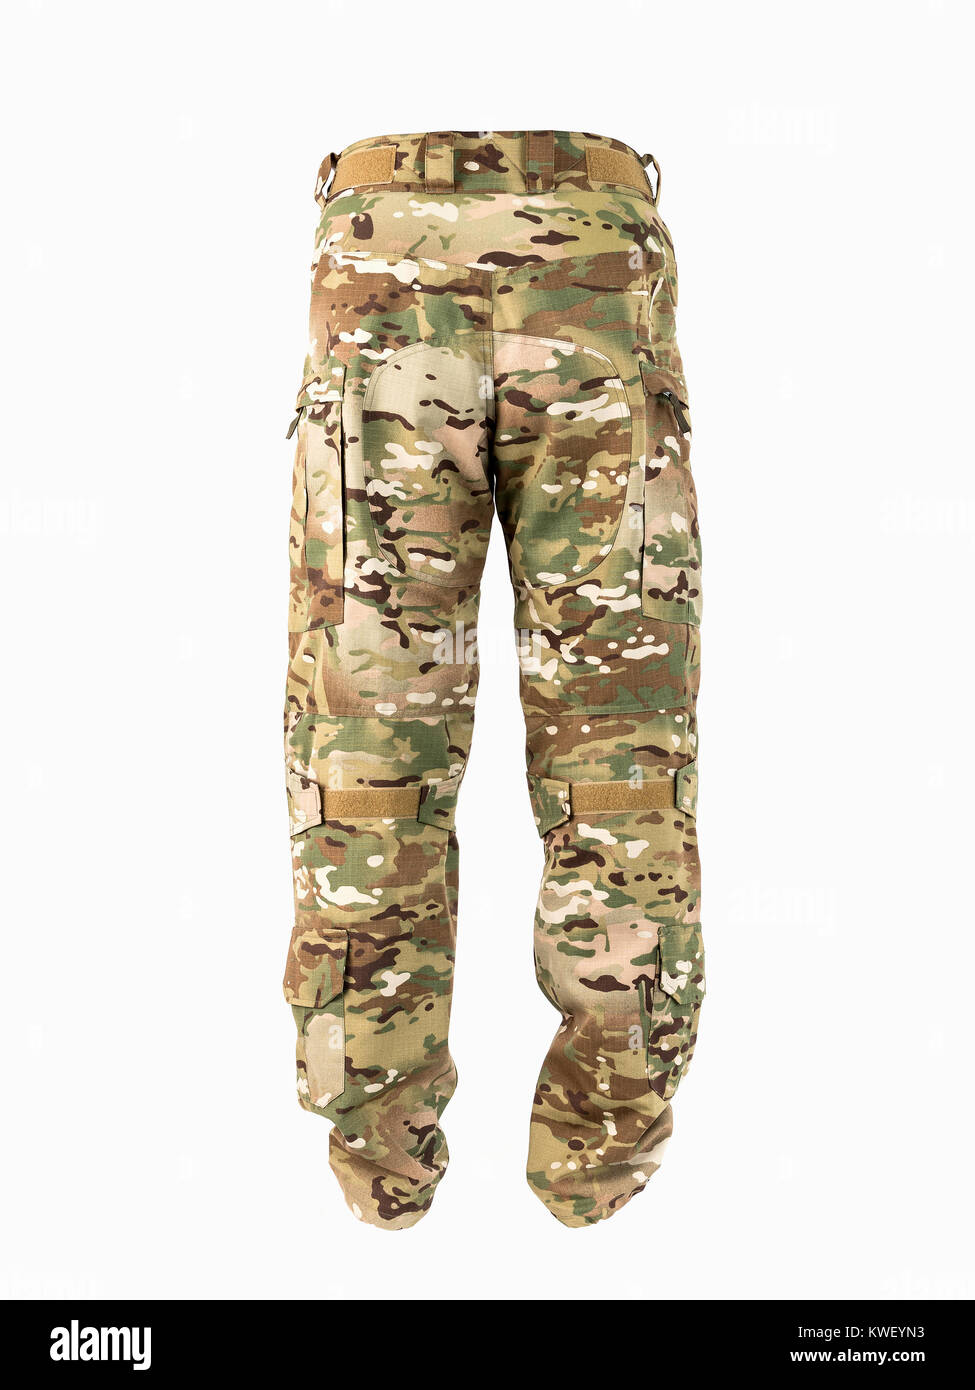 Chest pants for outdated activities. Camouflage pants Stock Photo